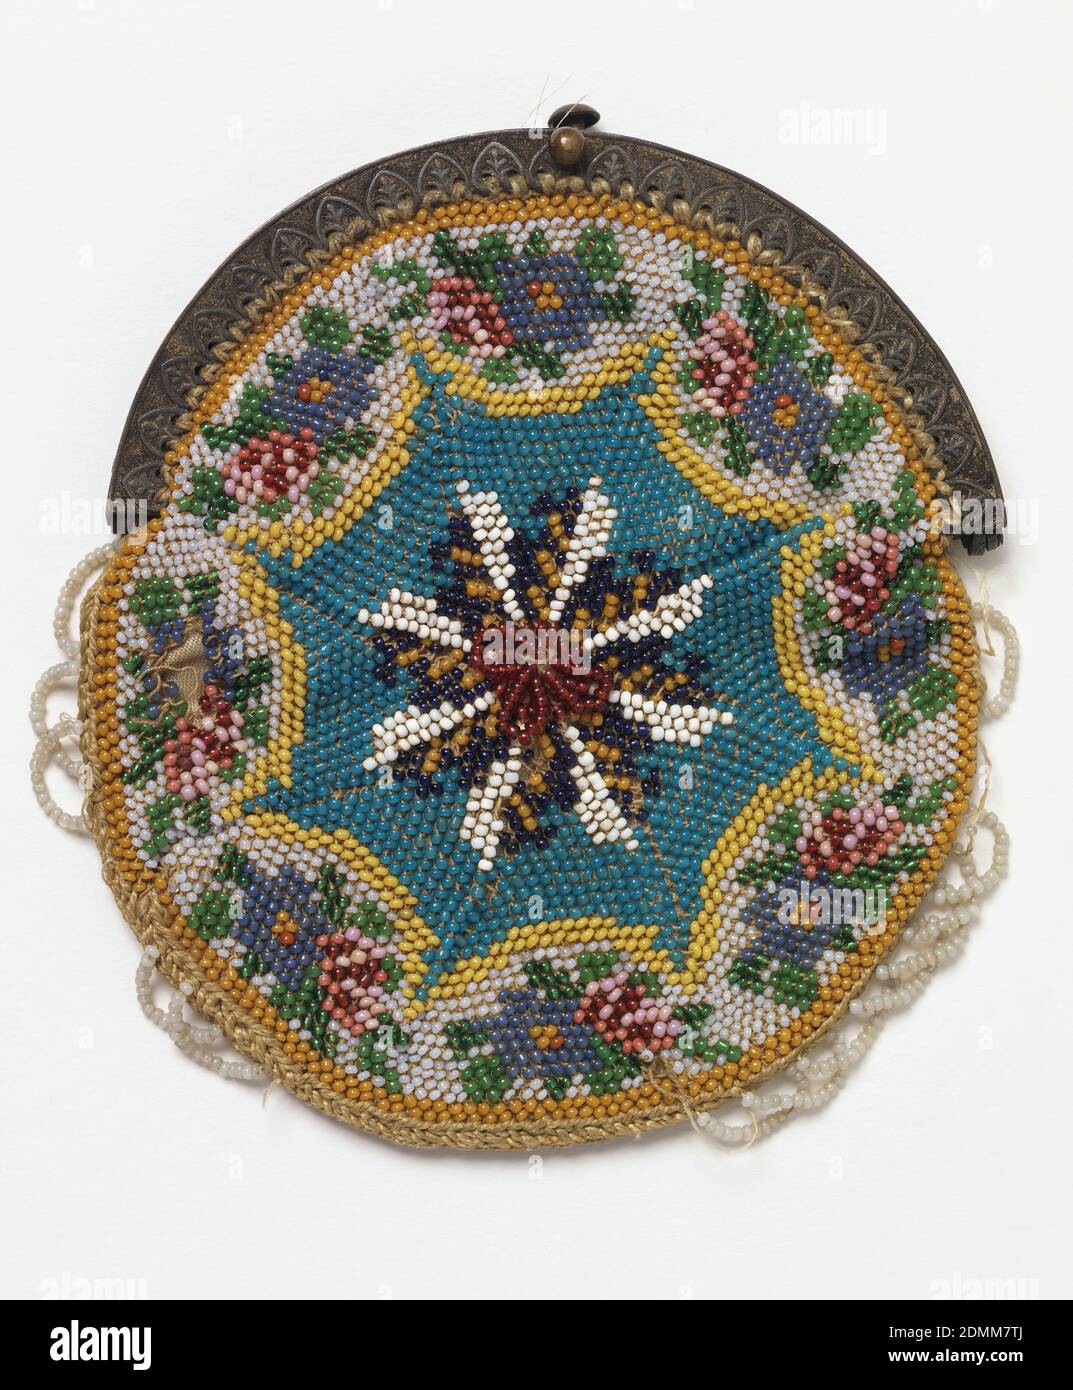 Purse, Medium: glass beads, silk, metal frame Technique: beaded knitting, Knitted bag, circular in form, with an eight-pointed star in the middle with a floral border. Beaded scallops around edges; metal frame, silk lining., USA, mid-19th century, costume & accessories, Purse Stock Photo